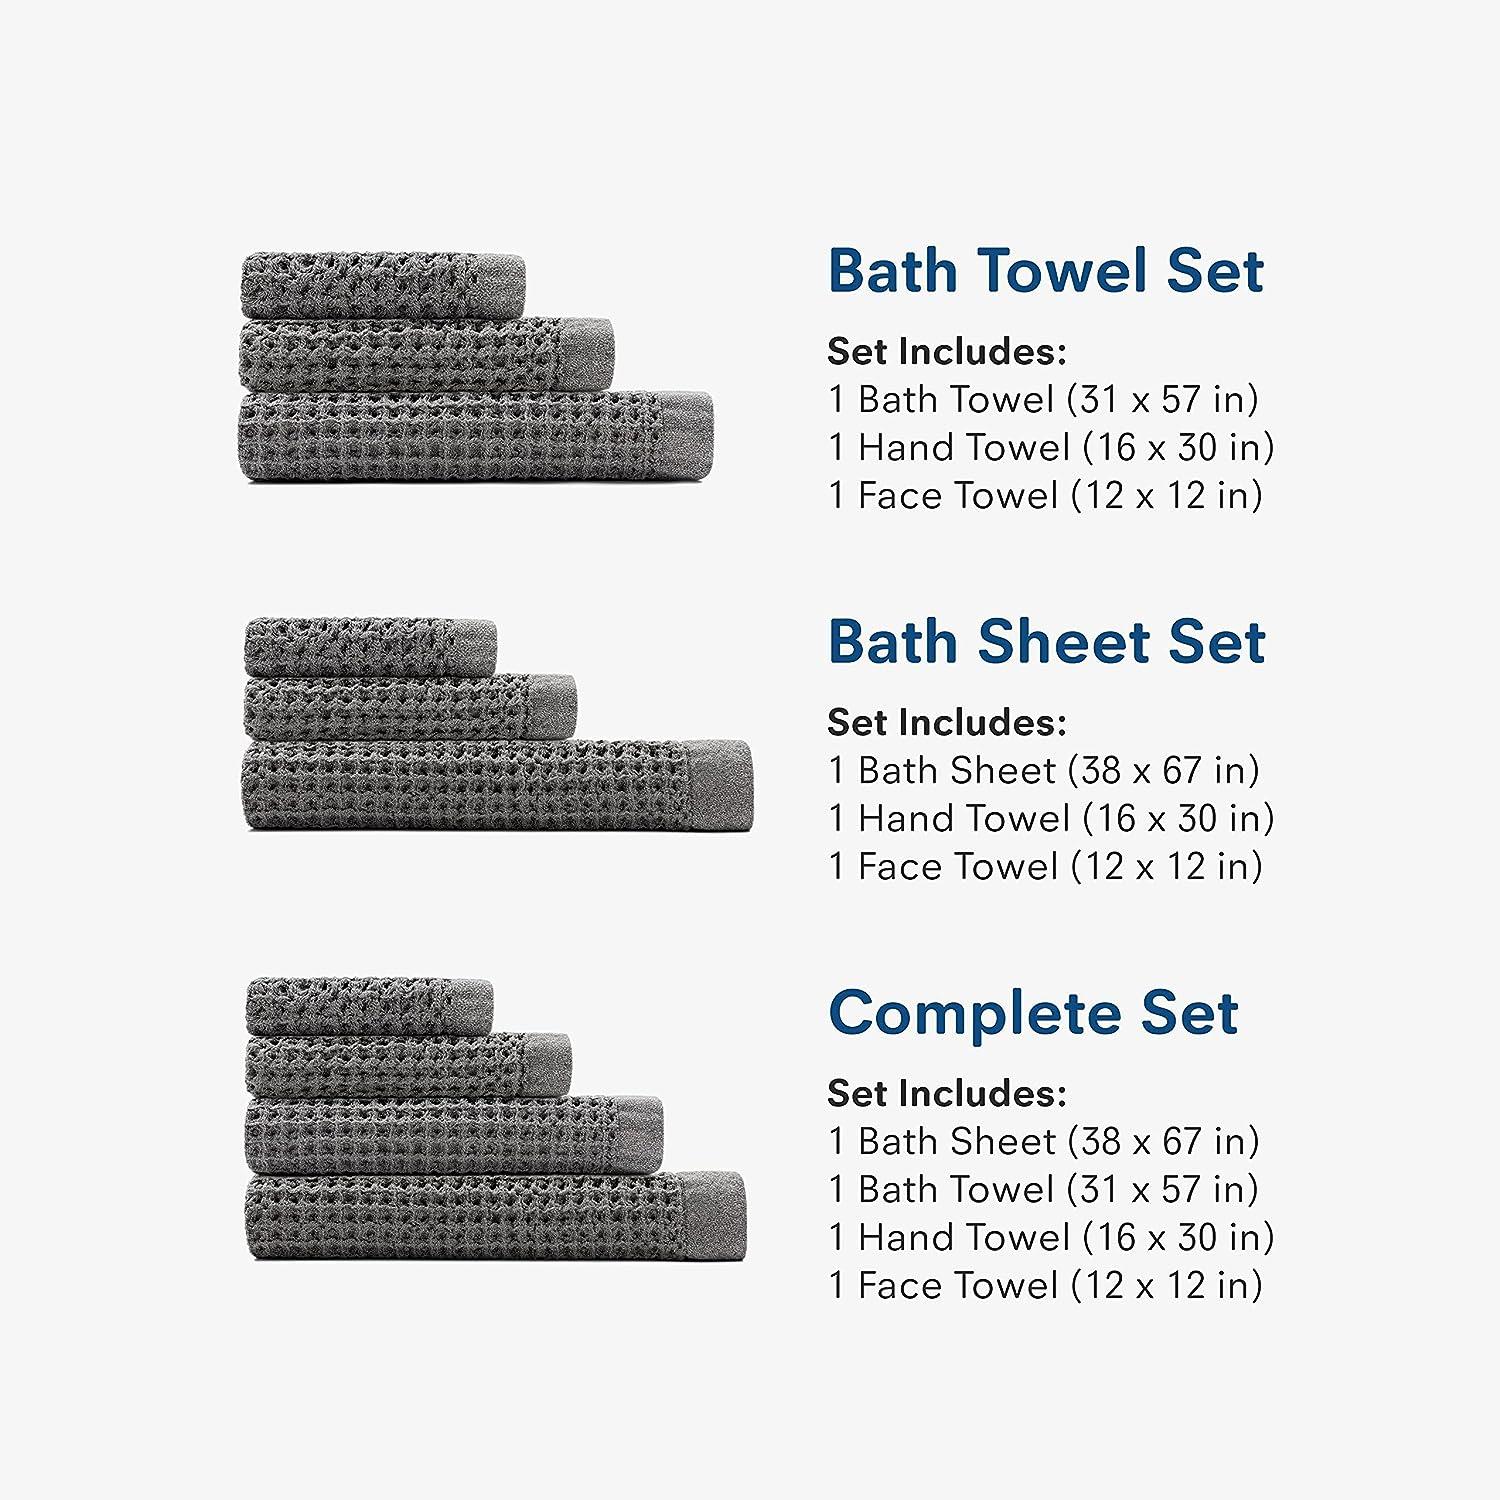 ONSEN - Bath Towel - Waffle Weave - 100% Supima Cotton - Lusciously Soft,  Durable, Fast Absorbing - Quick Dry - Ultra-Soft - Plush & Absorbent 